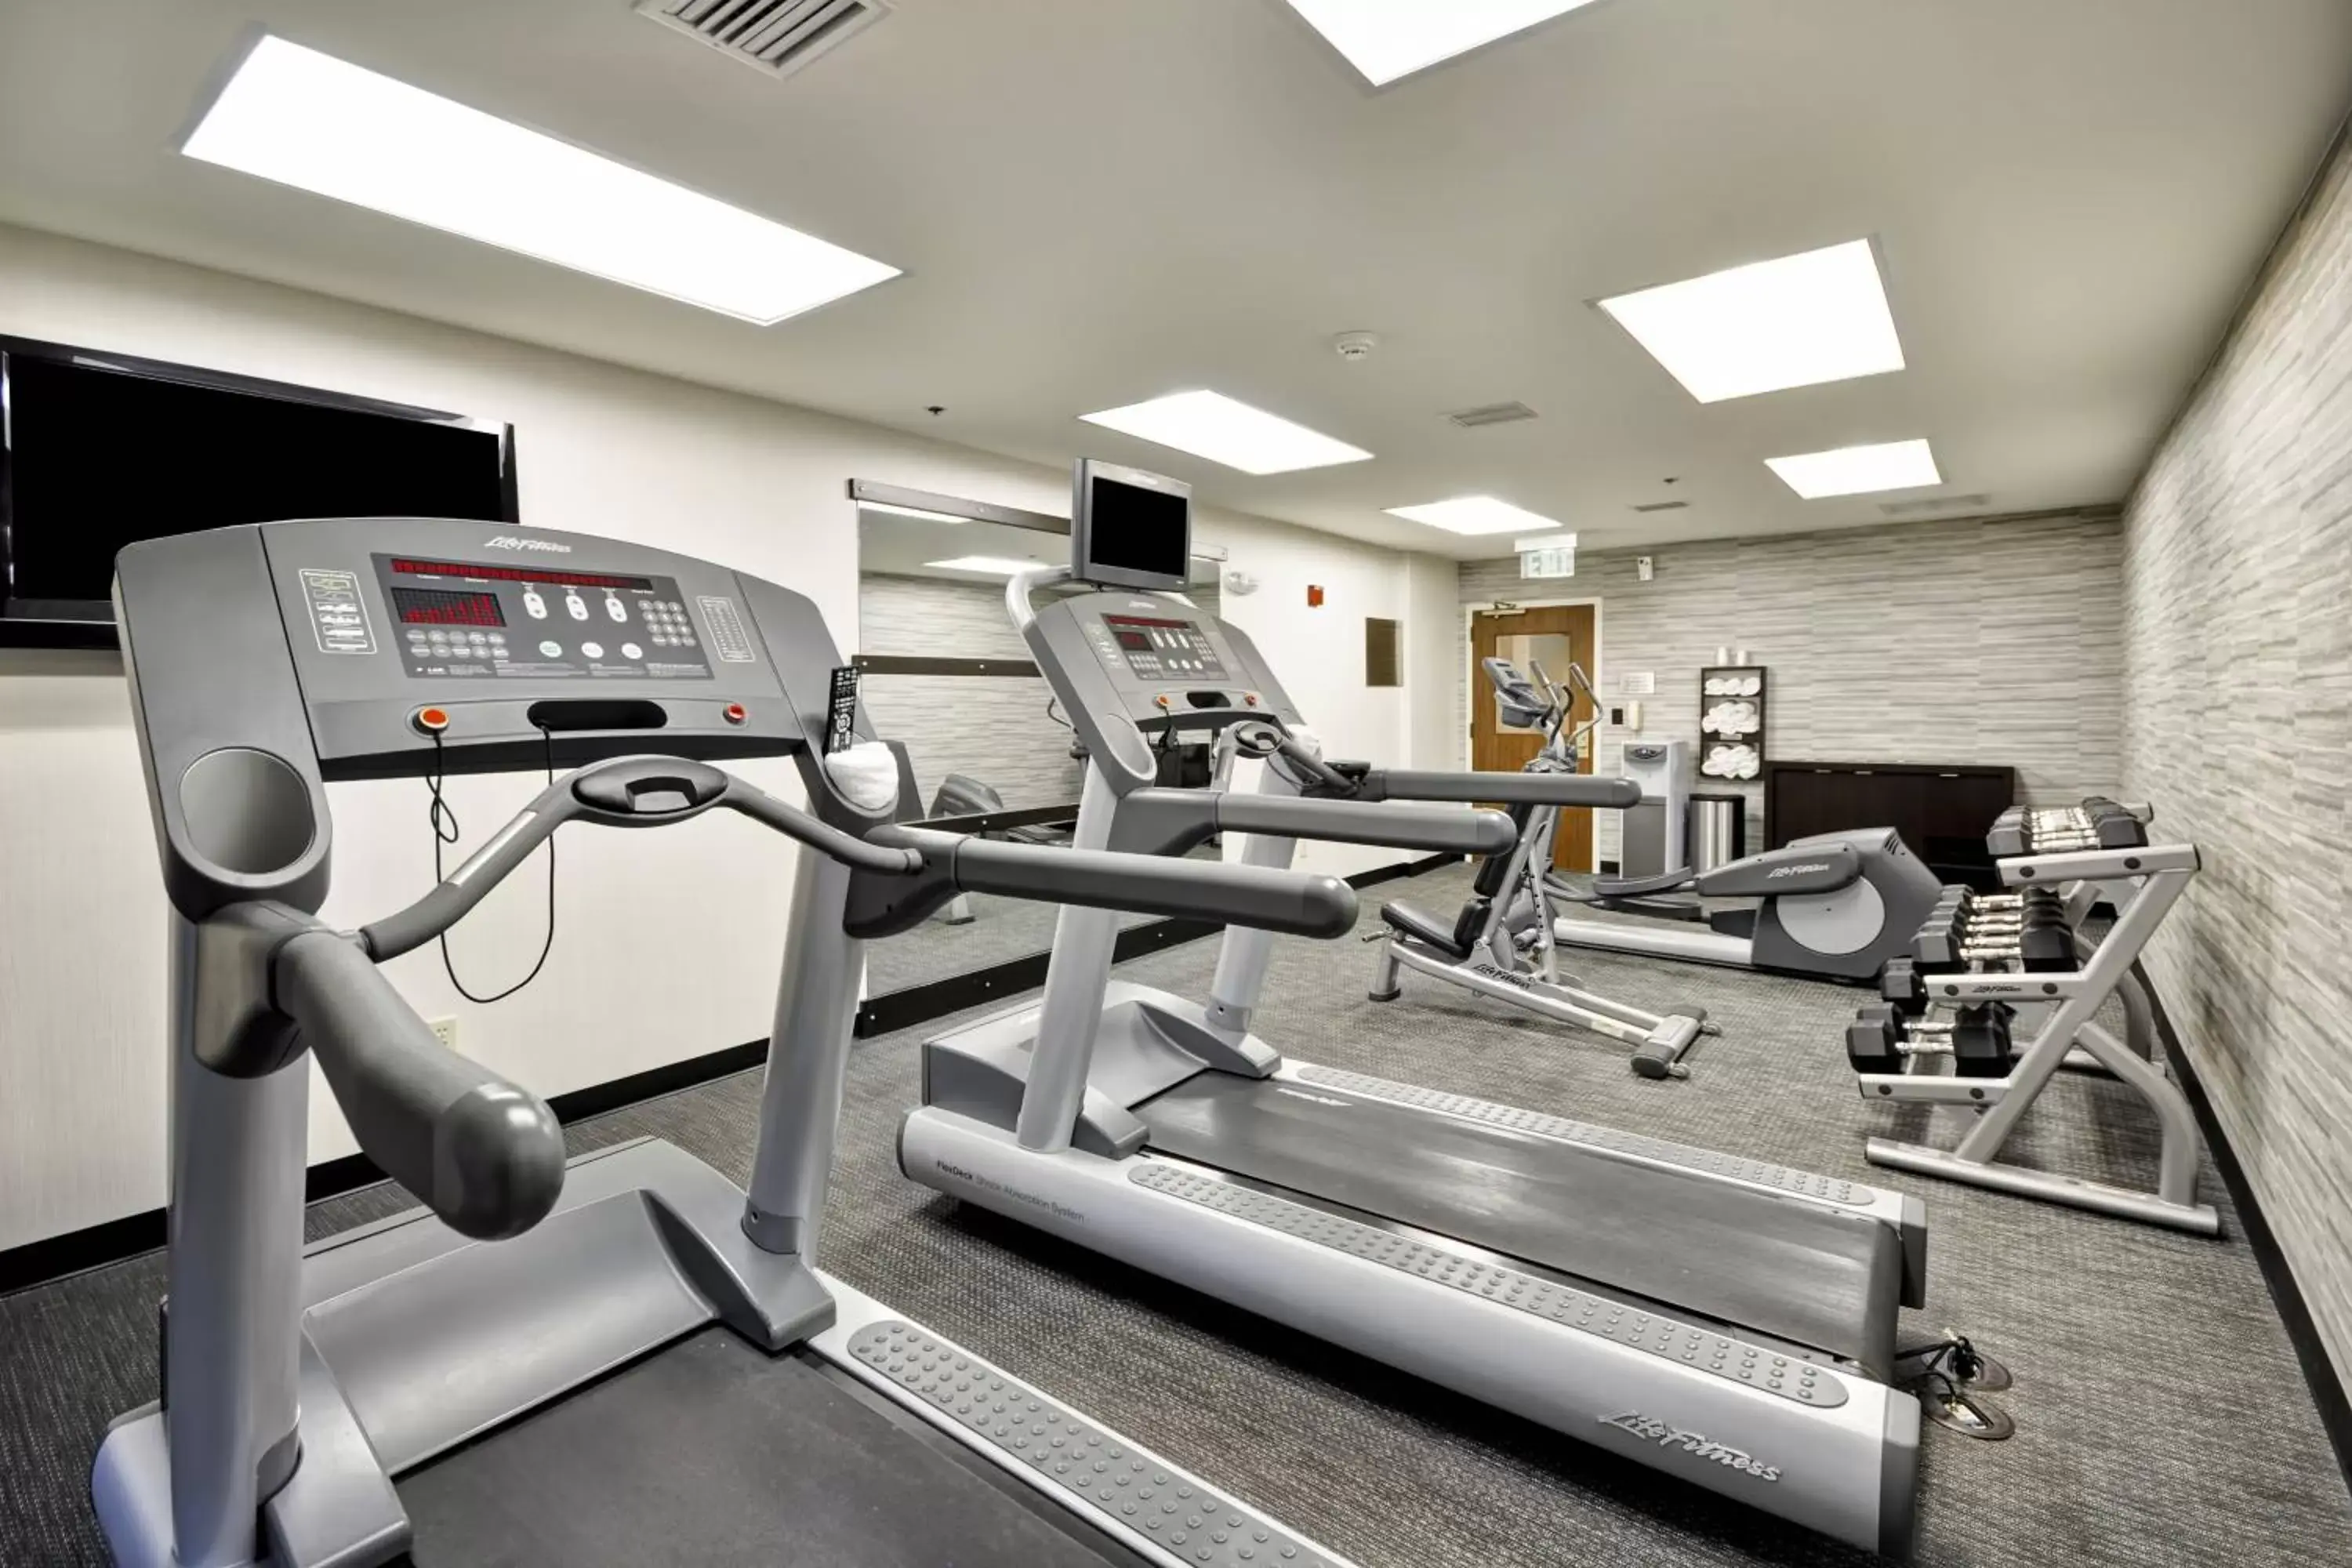 Fitness centre/facilities, Fitness Center/Facilities in Courtyard by Marriott Jacksonville Airport/ Northeast